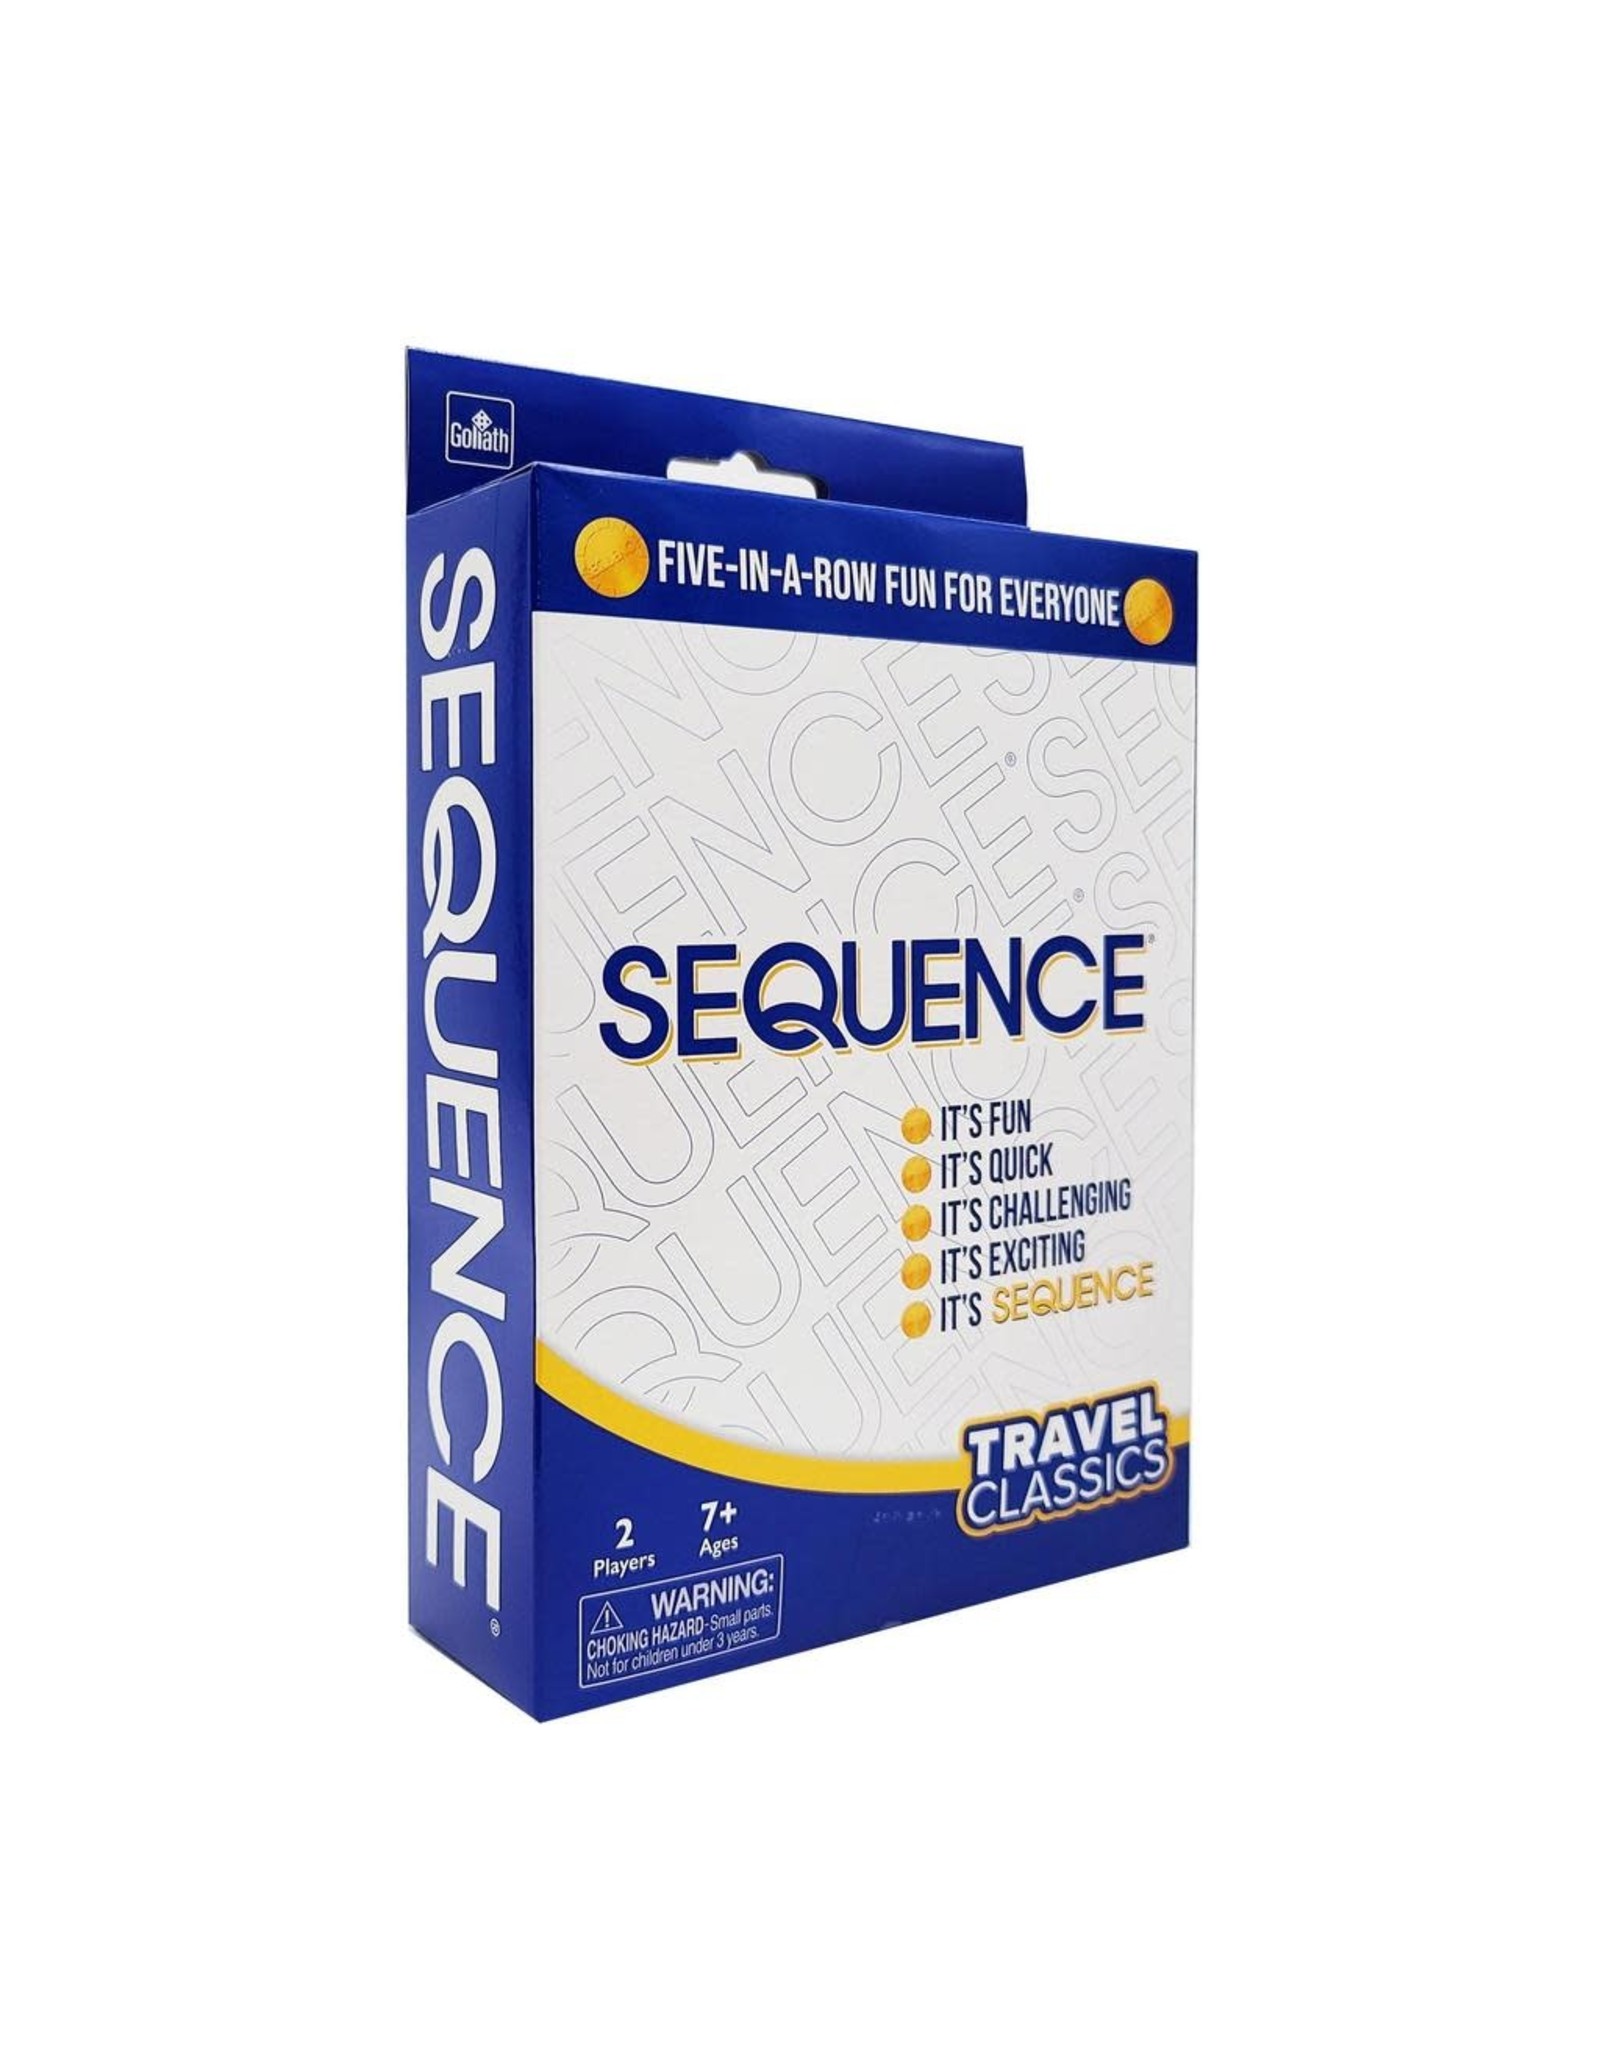 Sequence - Travel Classics